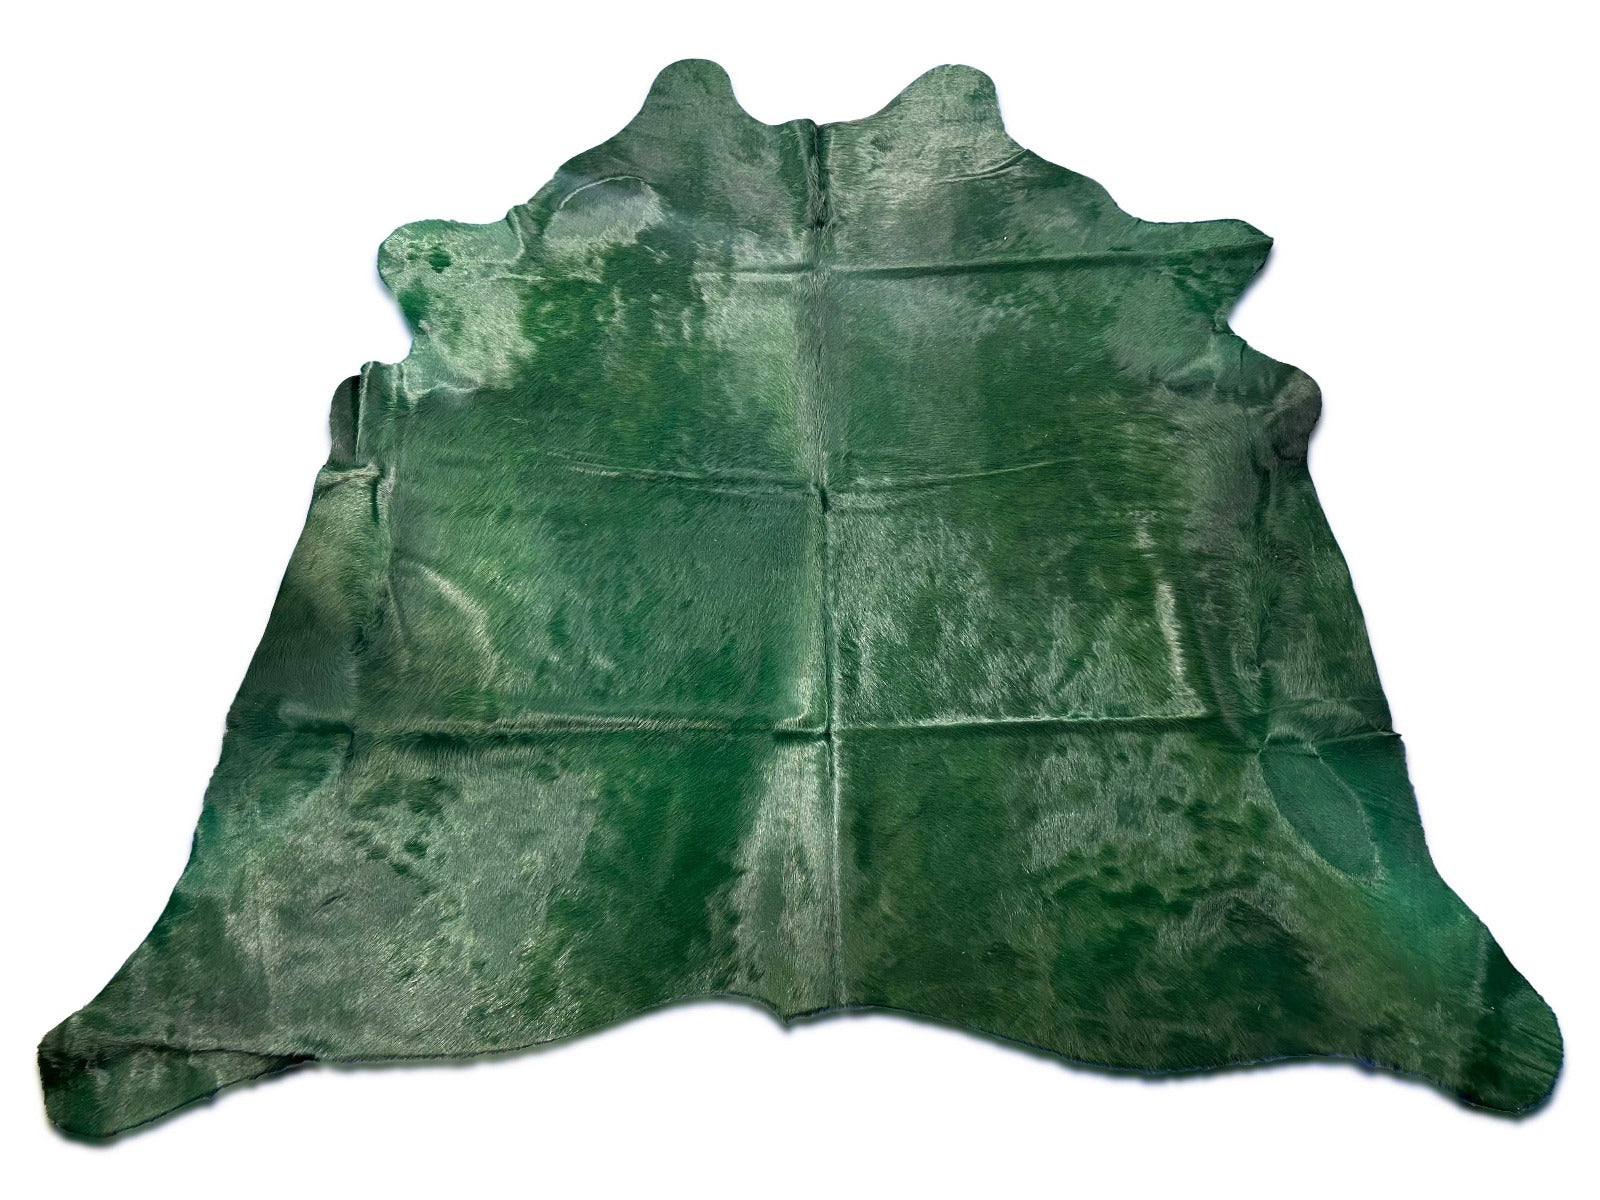 Dyed Emerald Green Cowhide Rug - Size: 7.2x7.5 feet M-1609